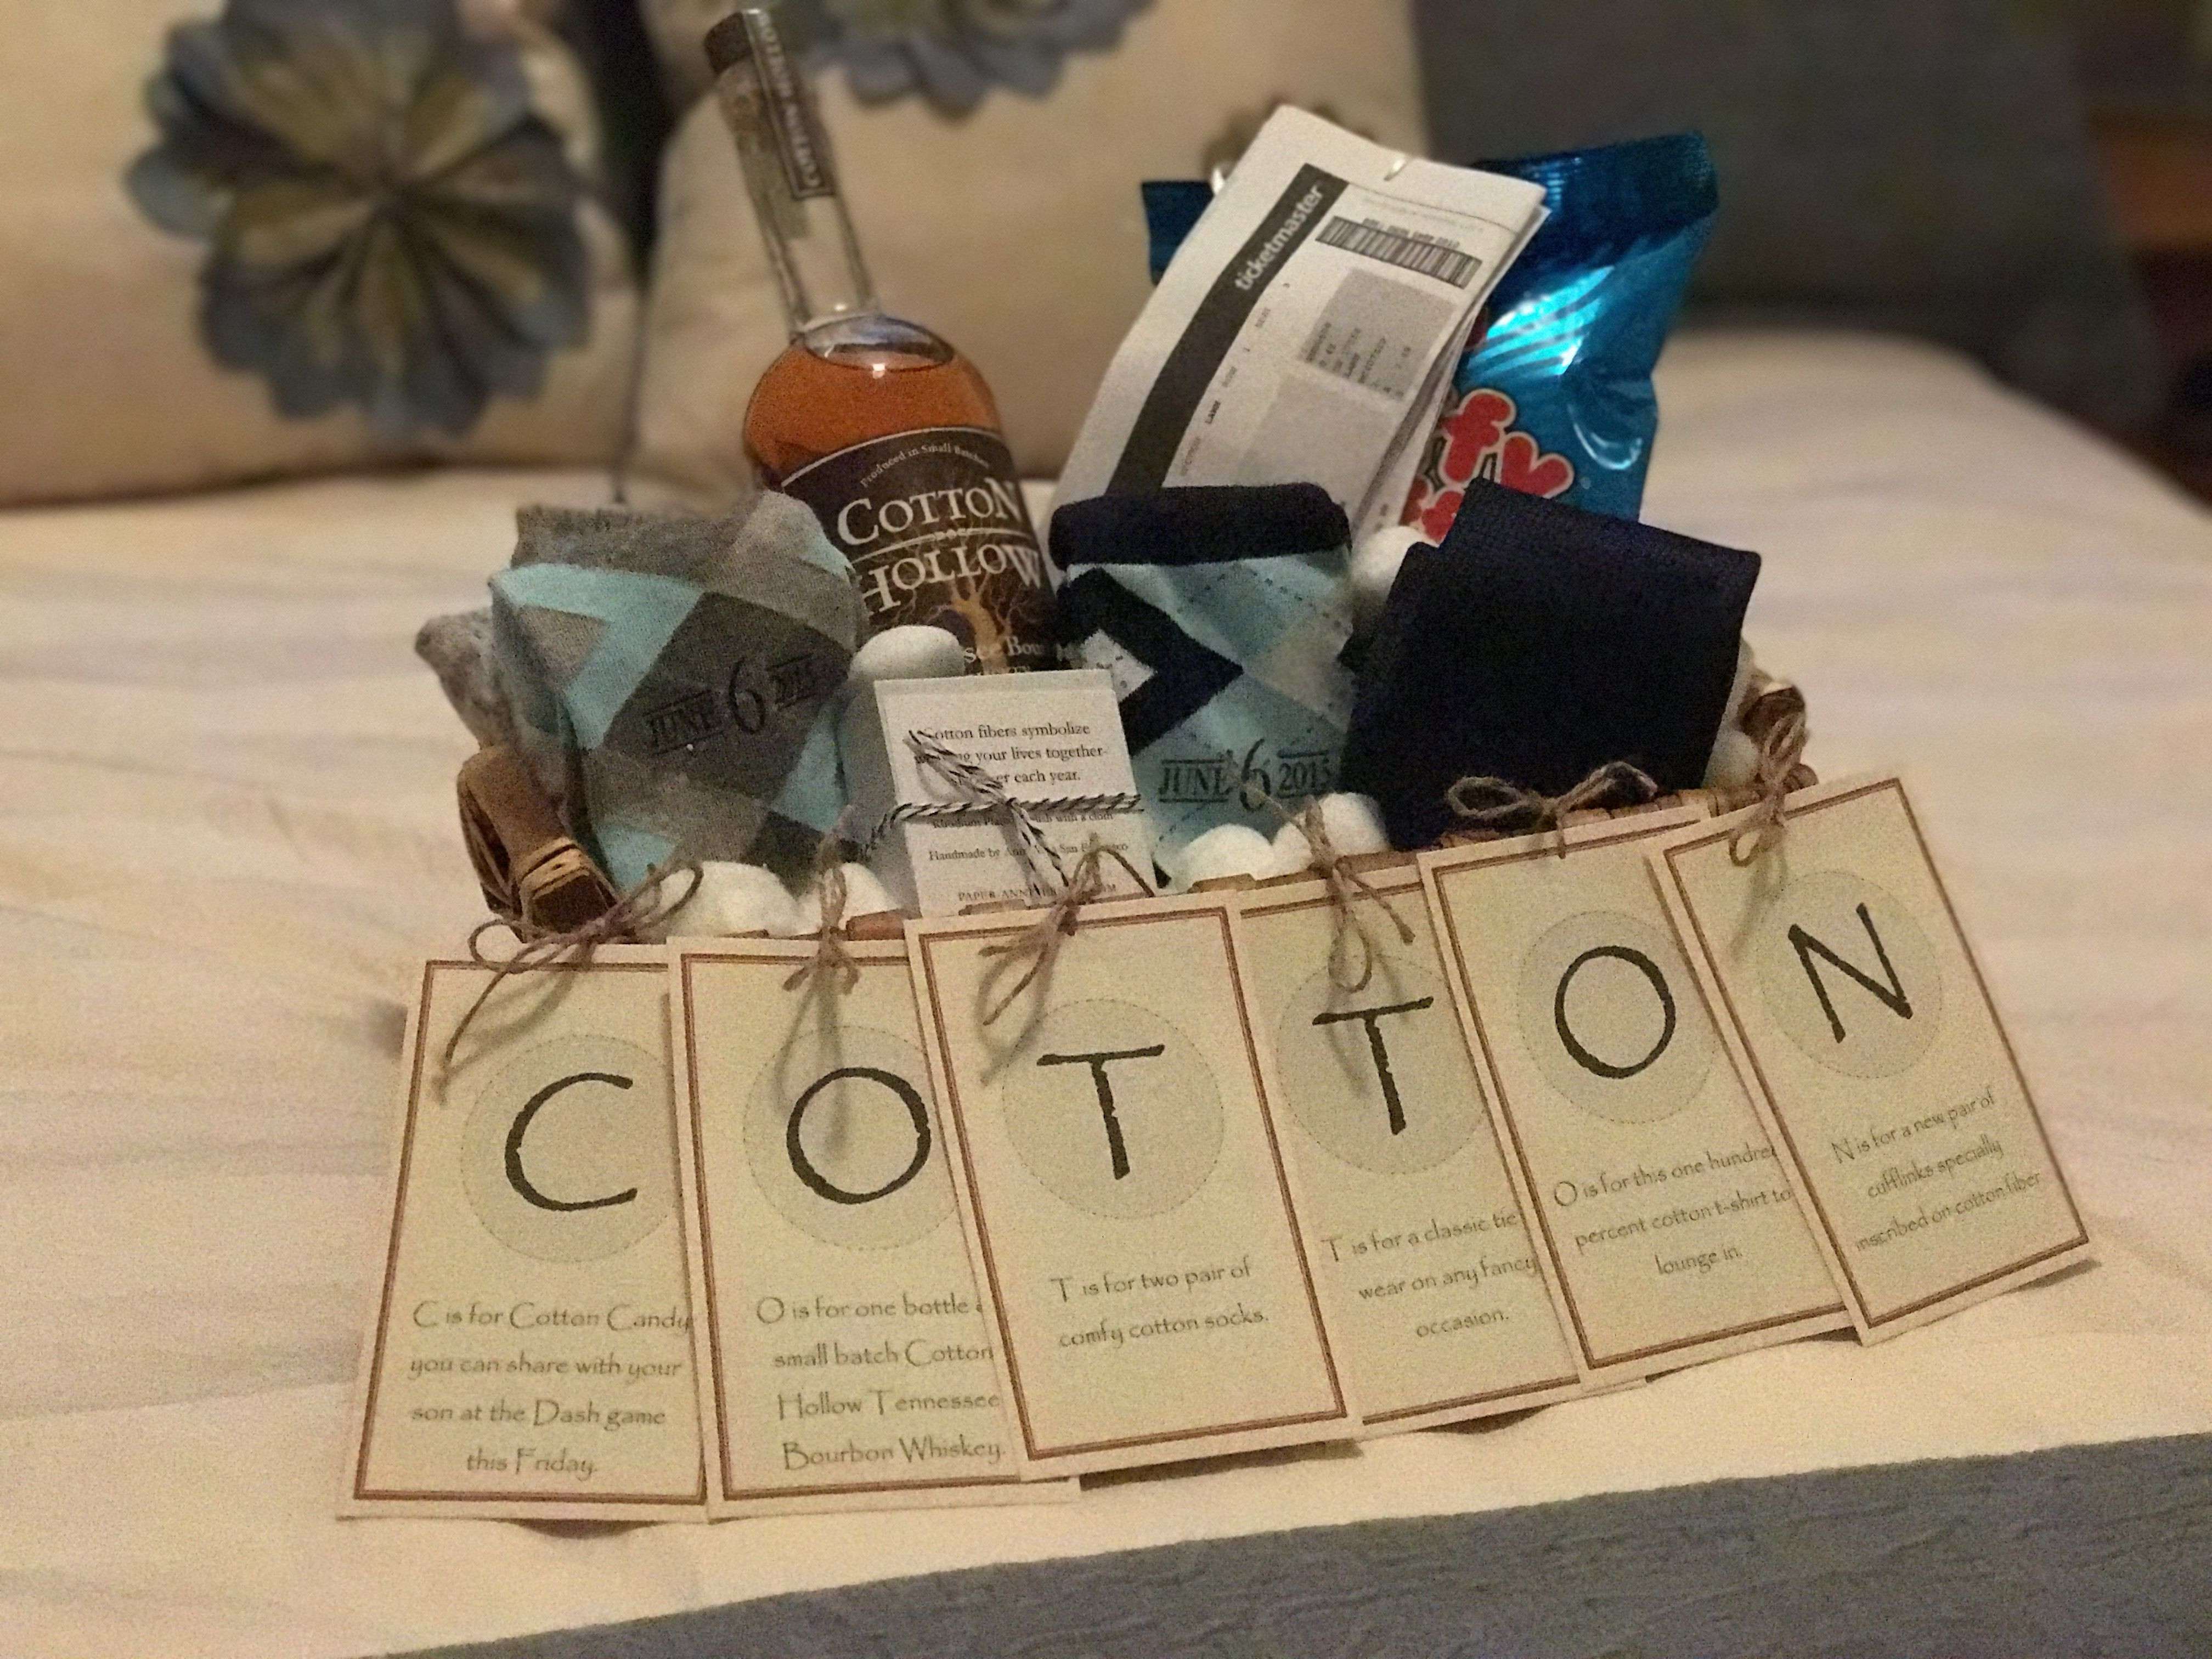 Wedding Gift Ideas For Men
 The "Cotton" Anniversary Gift for Him